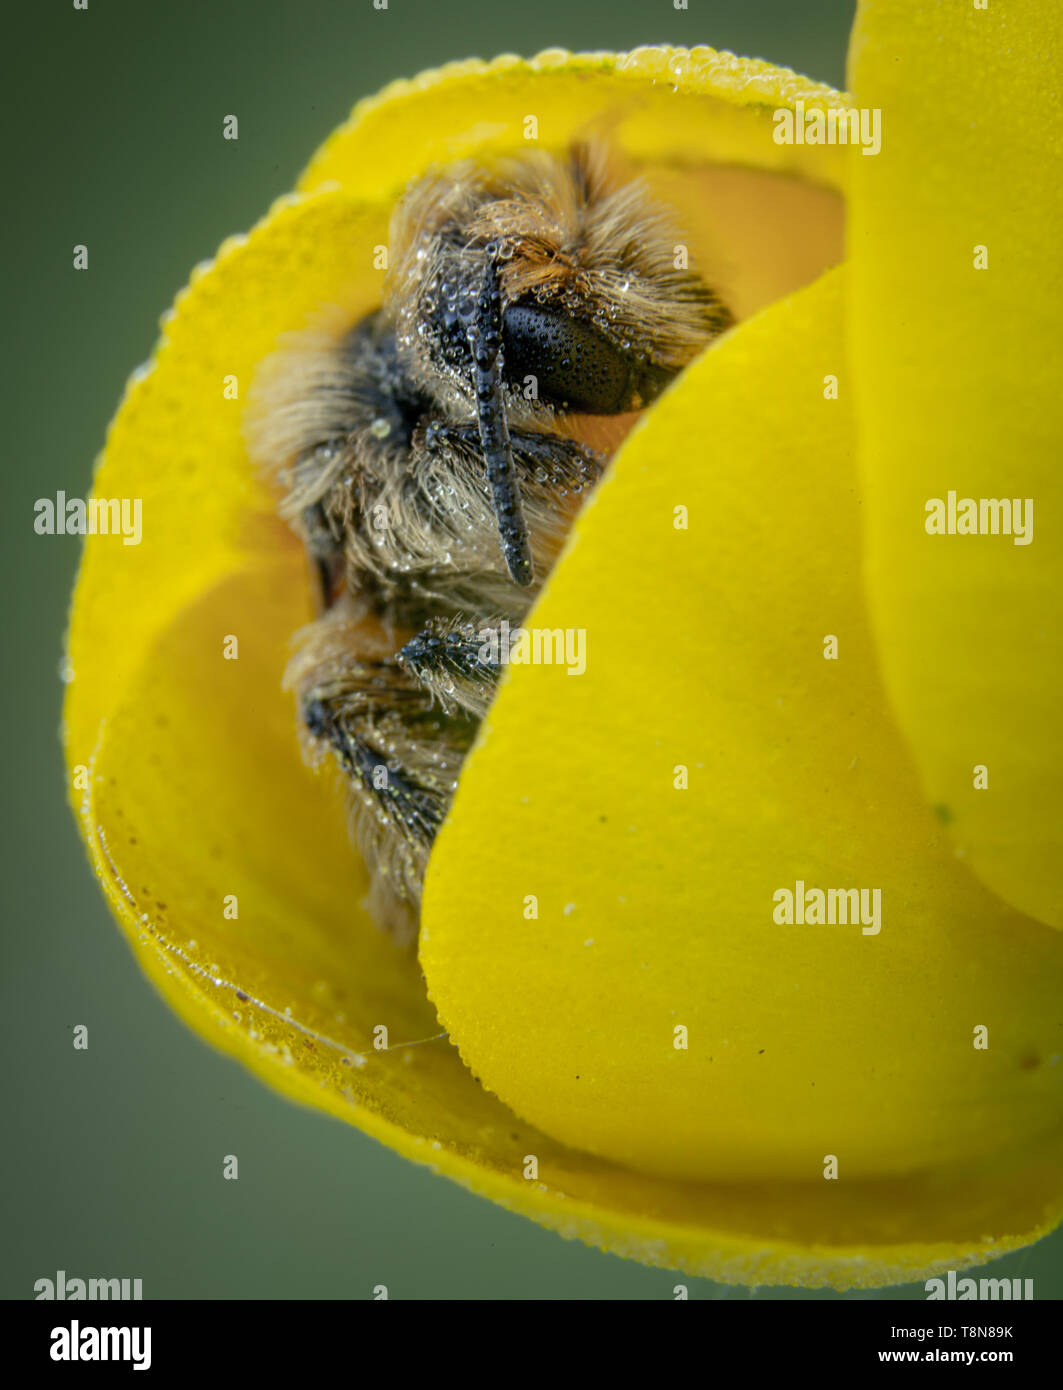 Little honeybee sleeping in a yellow flower petals with some raindrops on top Stock Photo